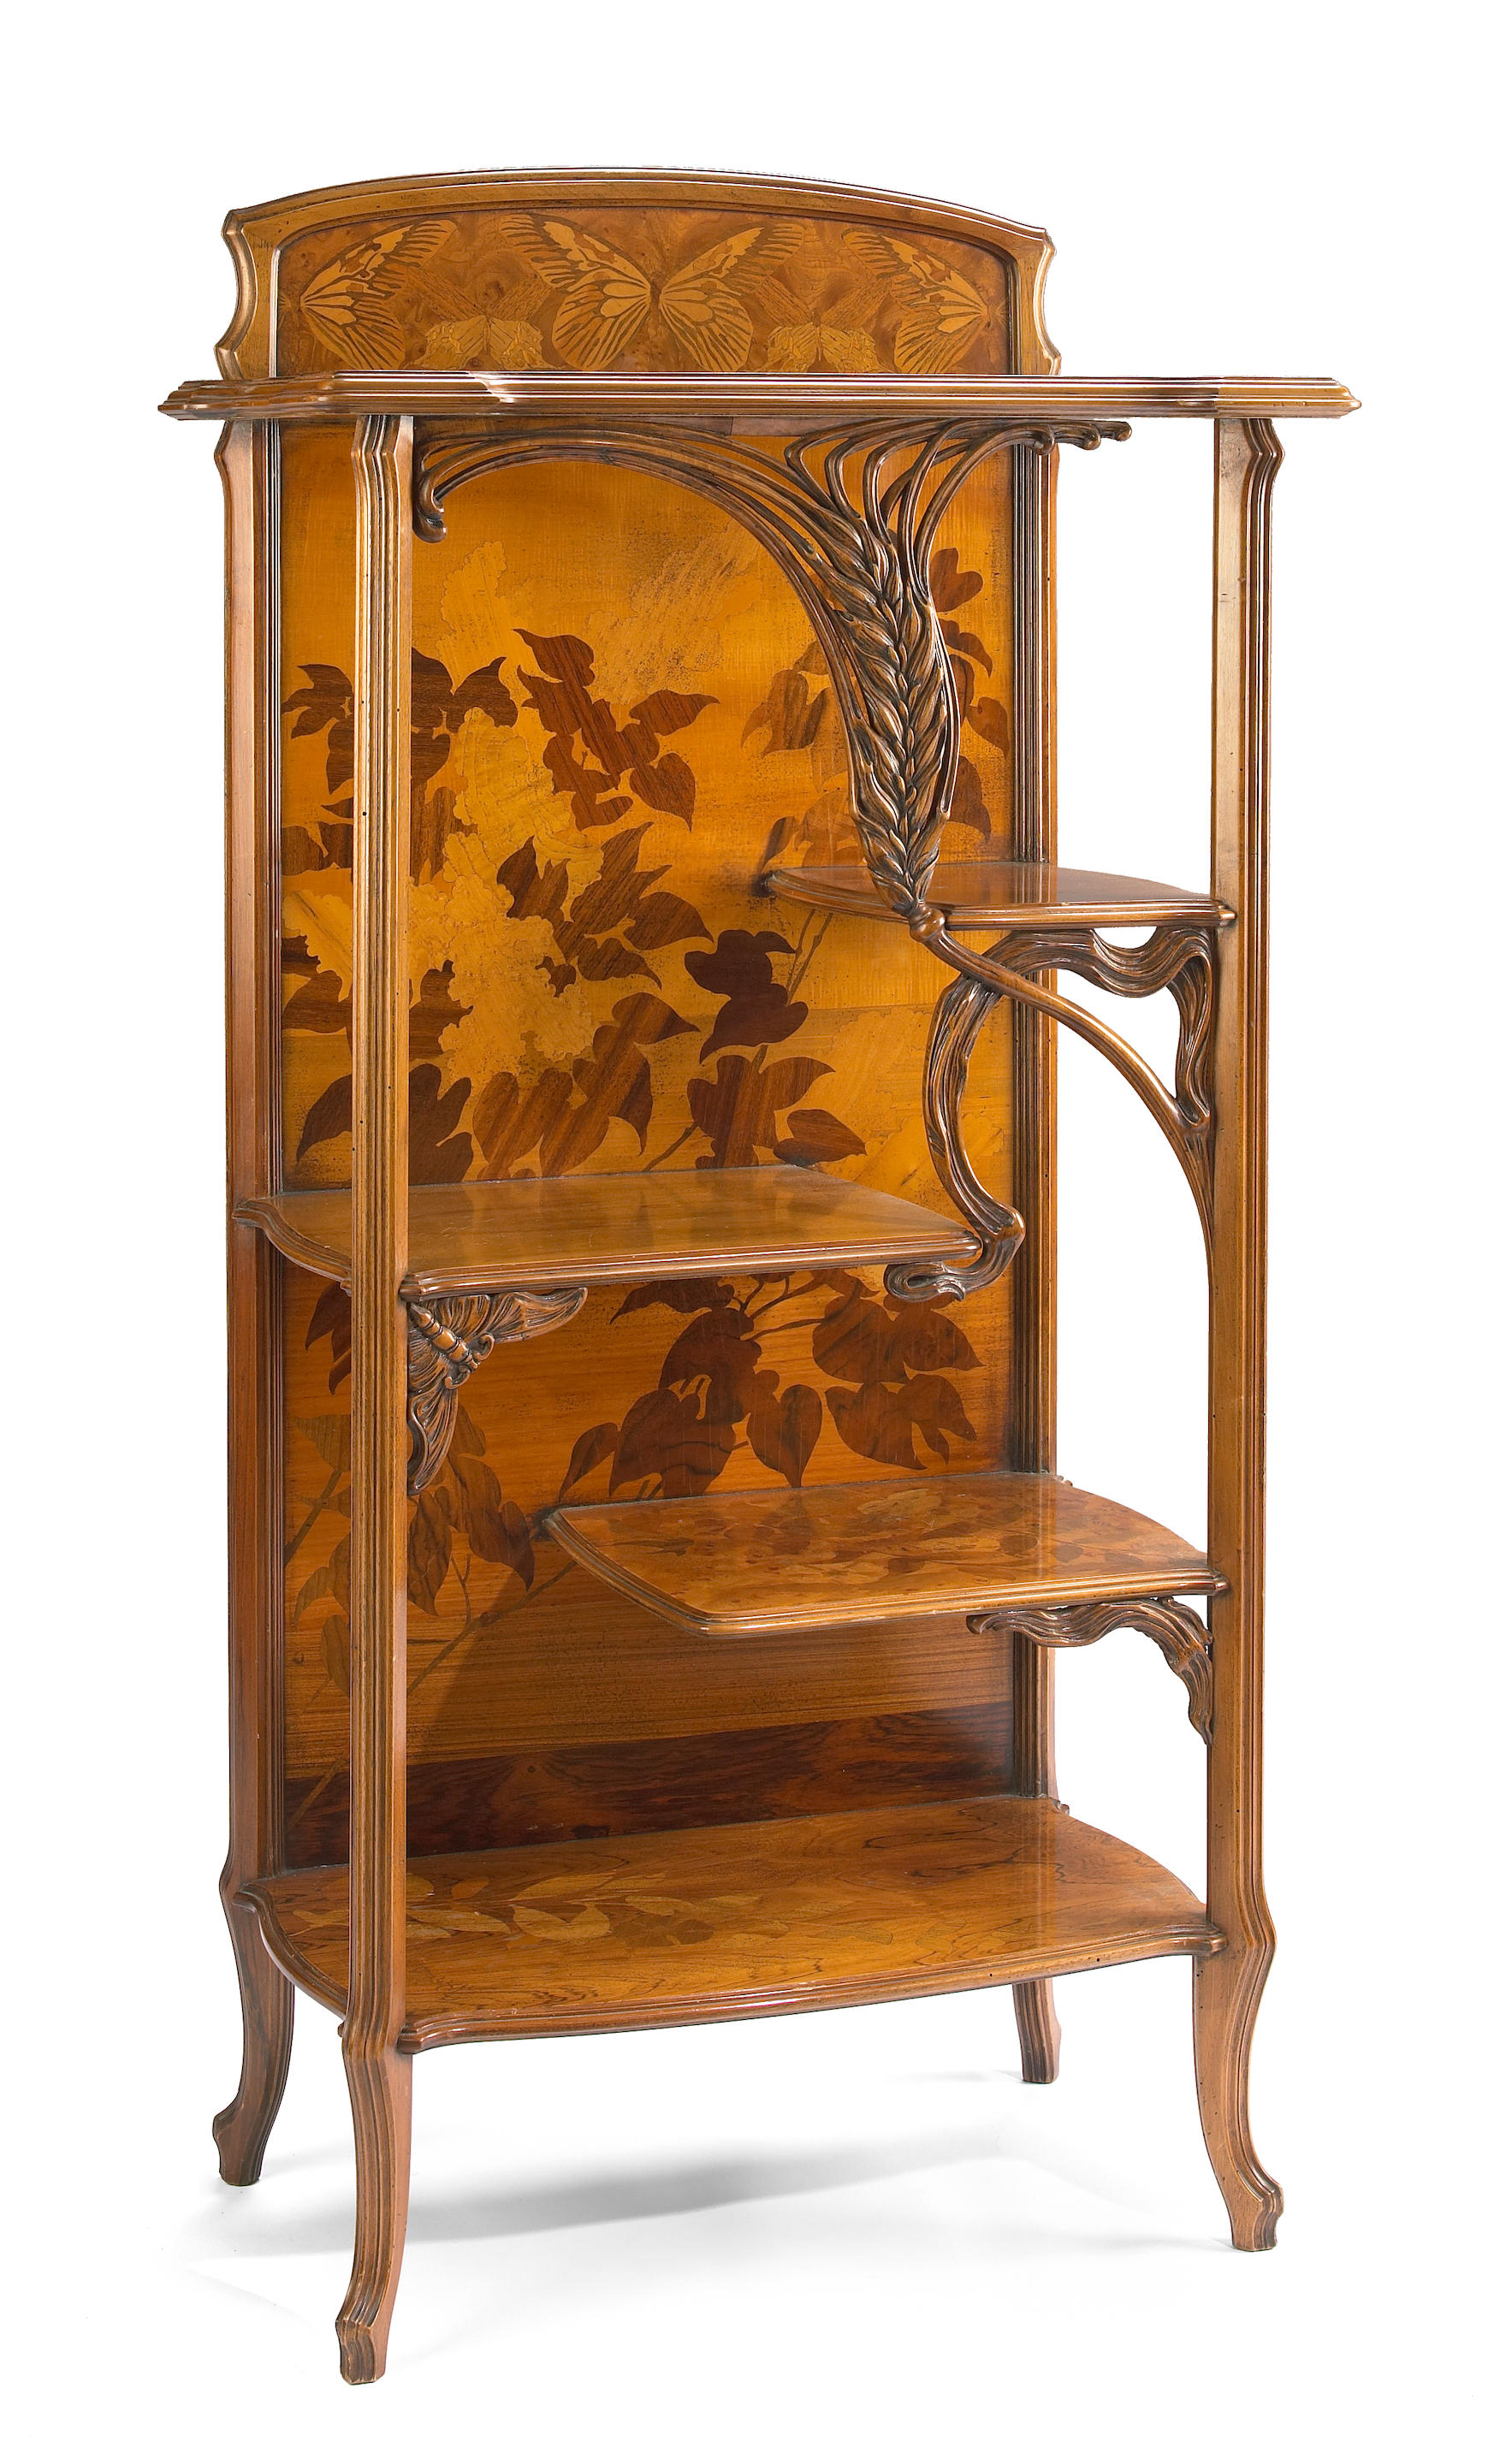 An Art Nouveau style marquetry and fruitwood étagère